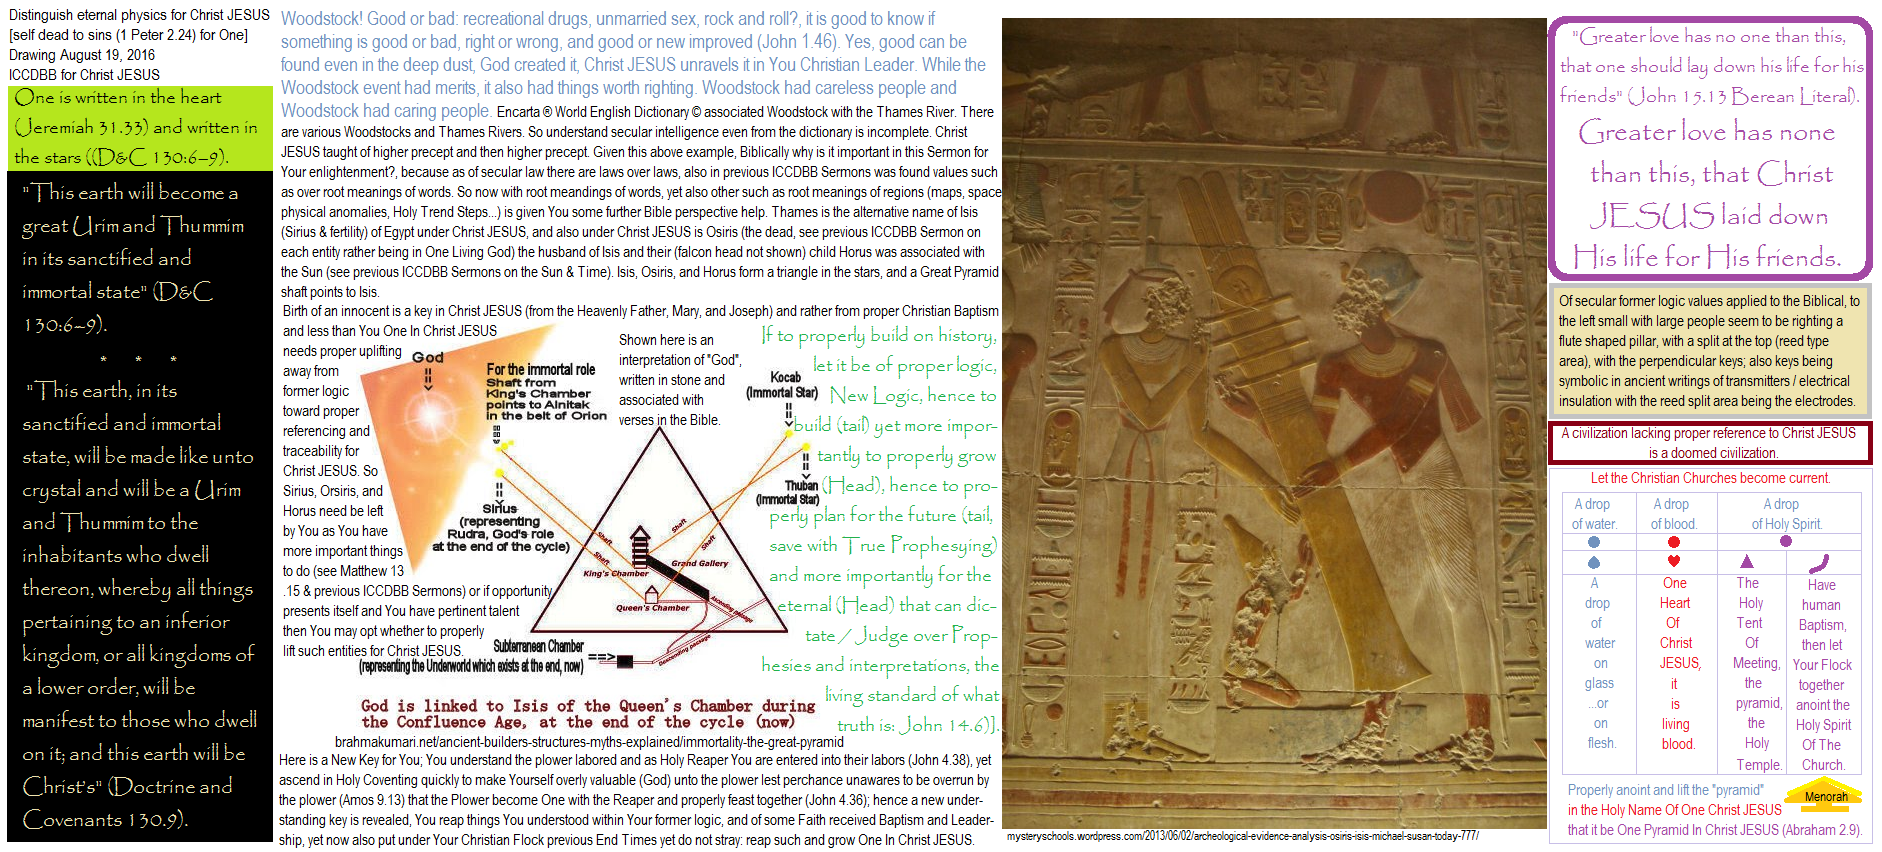 How to properly claim history and the eternal future in Christ JESUS, for One Mutual Benefit. Ancient aliens are shown with and using ancient alien technologies ranging from transmitter installation to interstellar communication with God (apparently) at Sirius, the brightest star in the night sky, for more abundantly joyful living in Christ JESUS